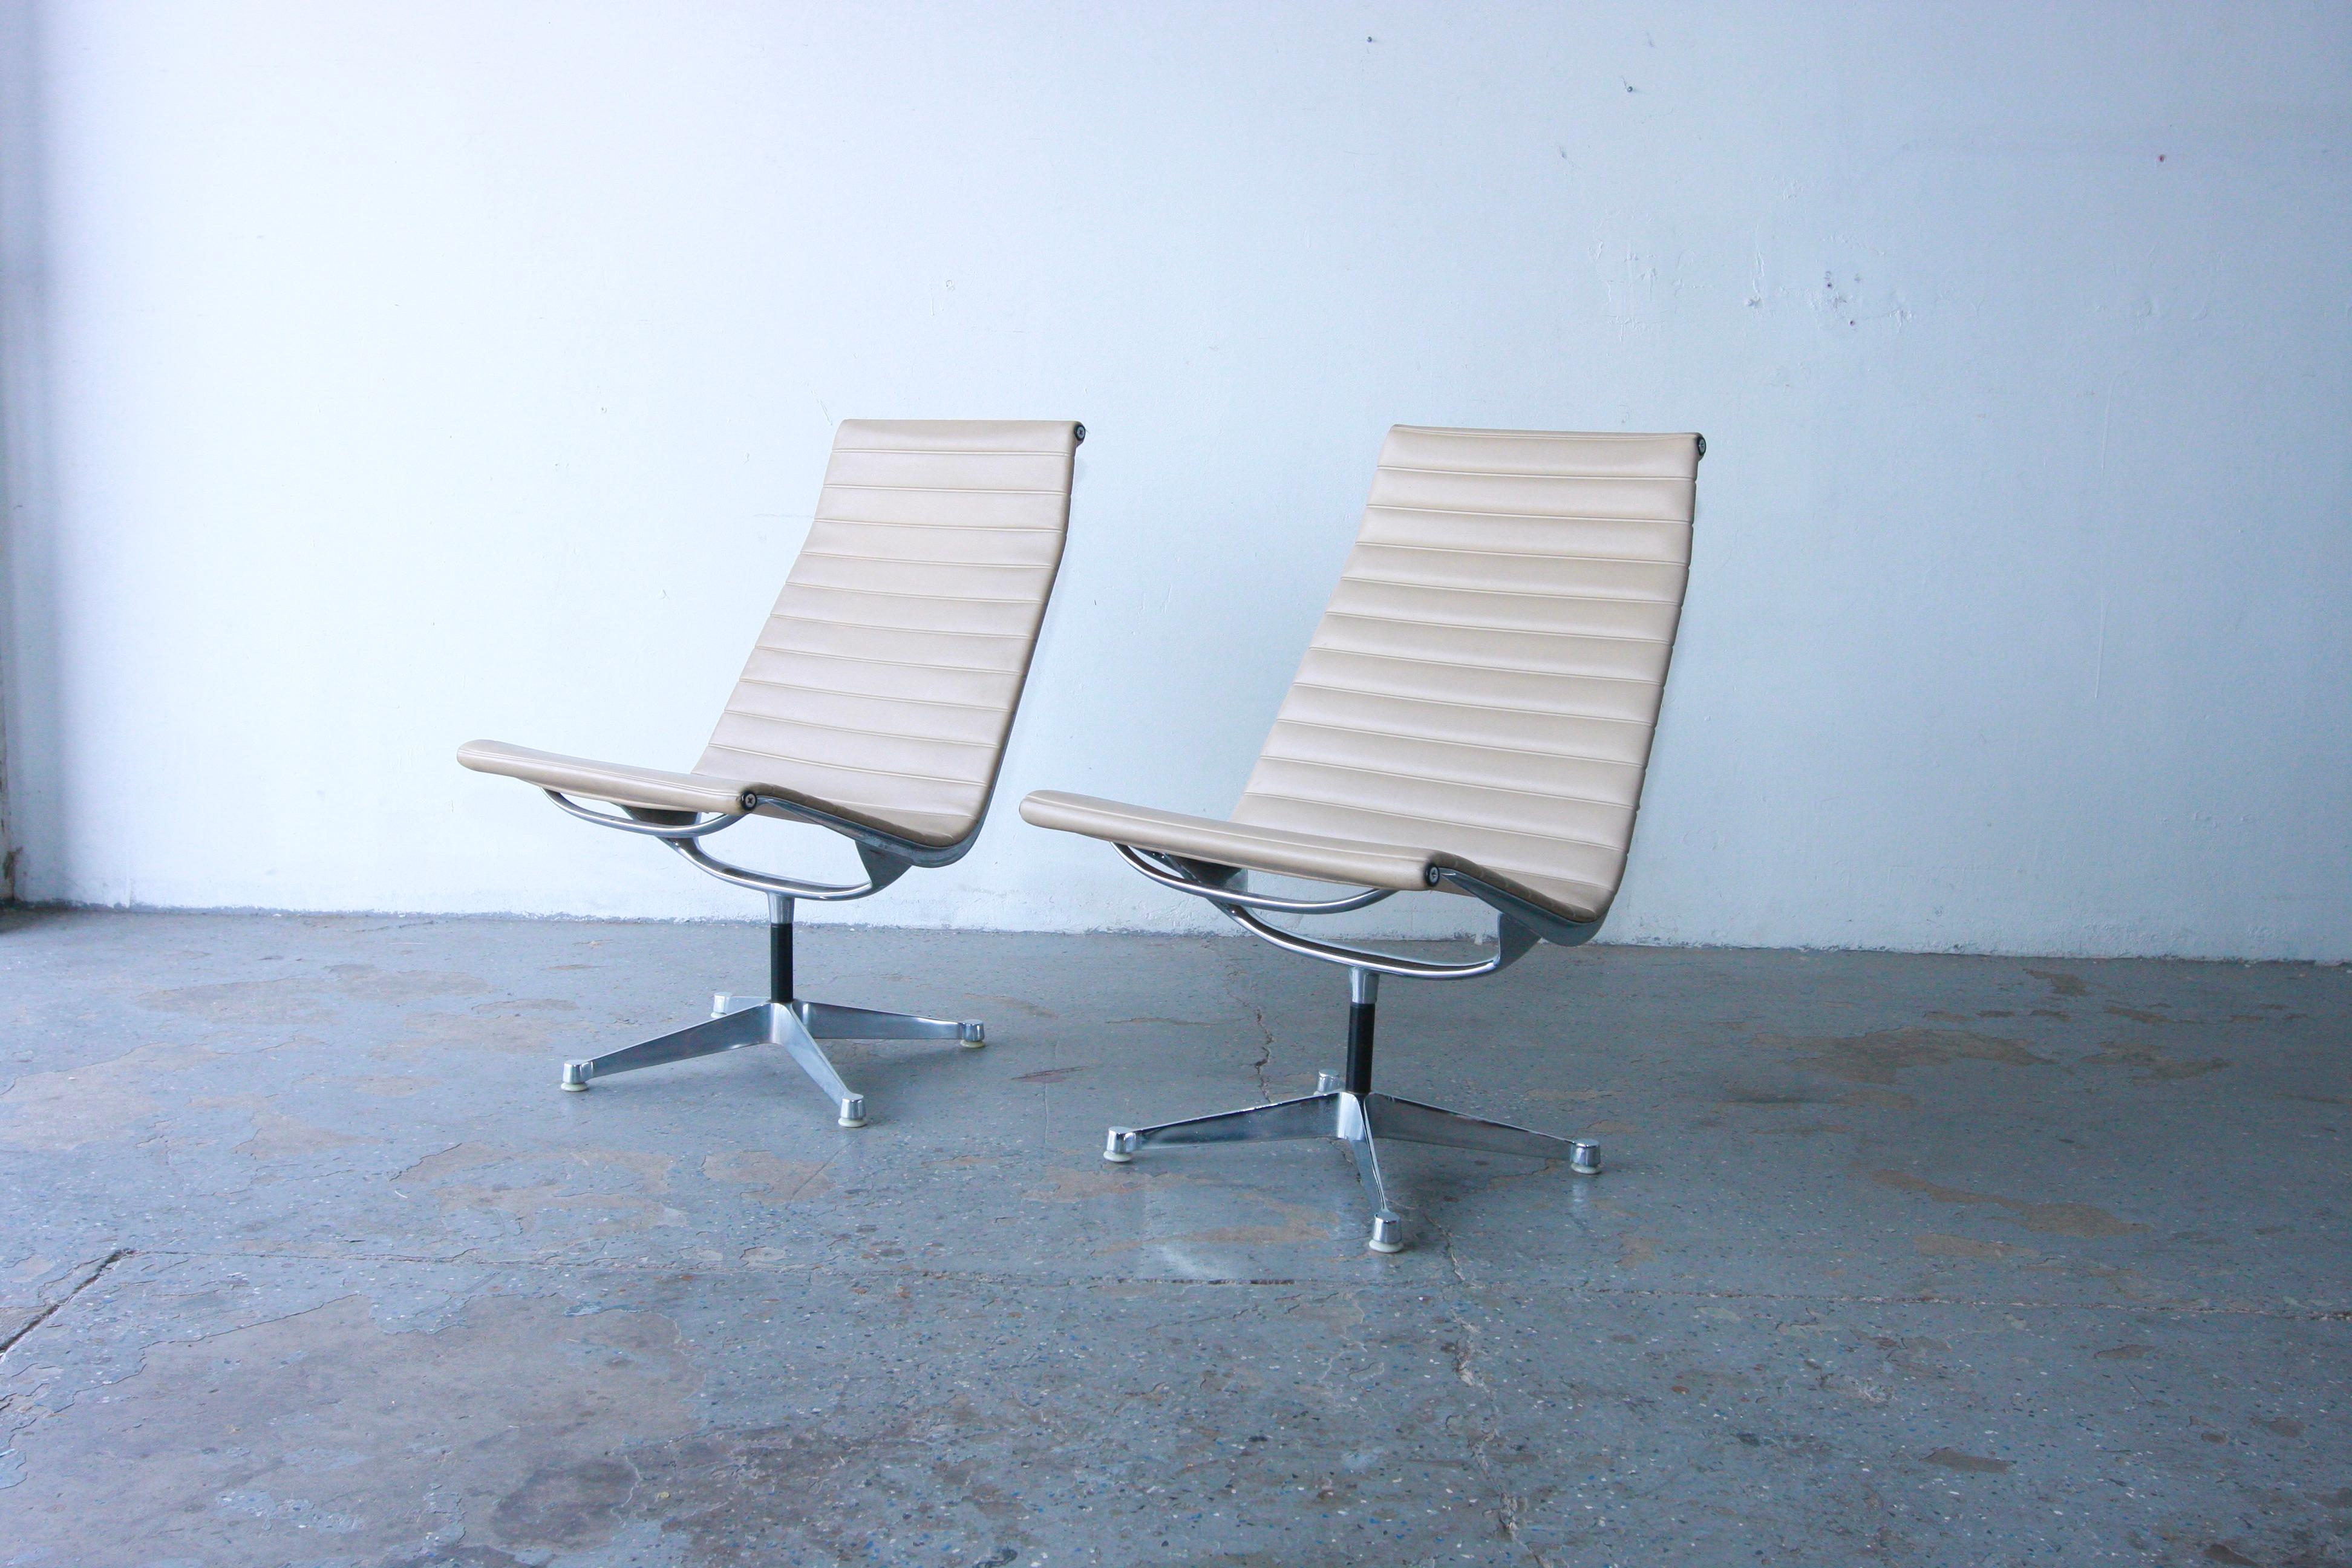 This is an original Iconic pair of Eames Aluminum Group Lounge Chairs designed by Charles and Ray Eames for Herman Miller in 1958. This  set was produced in the late 60’s or early 70’s . The pieces sport solid yet lightweight aluminum frames, and